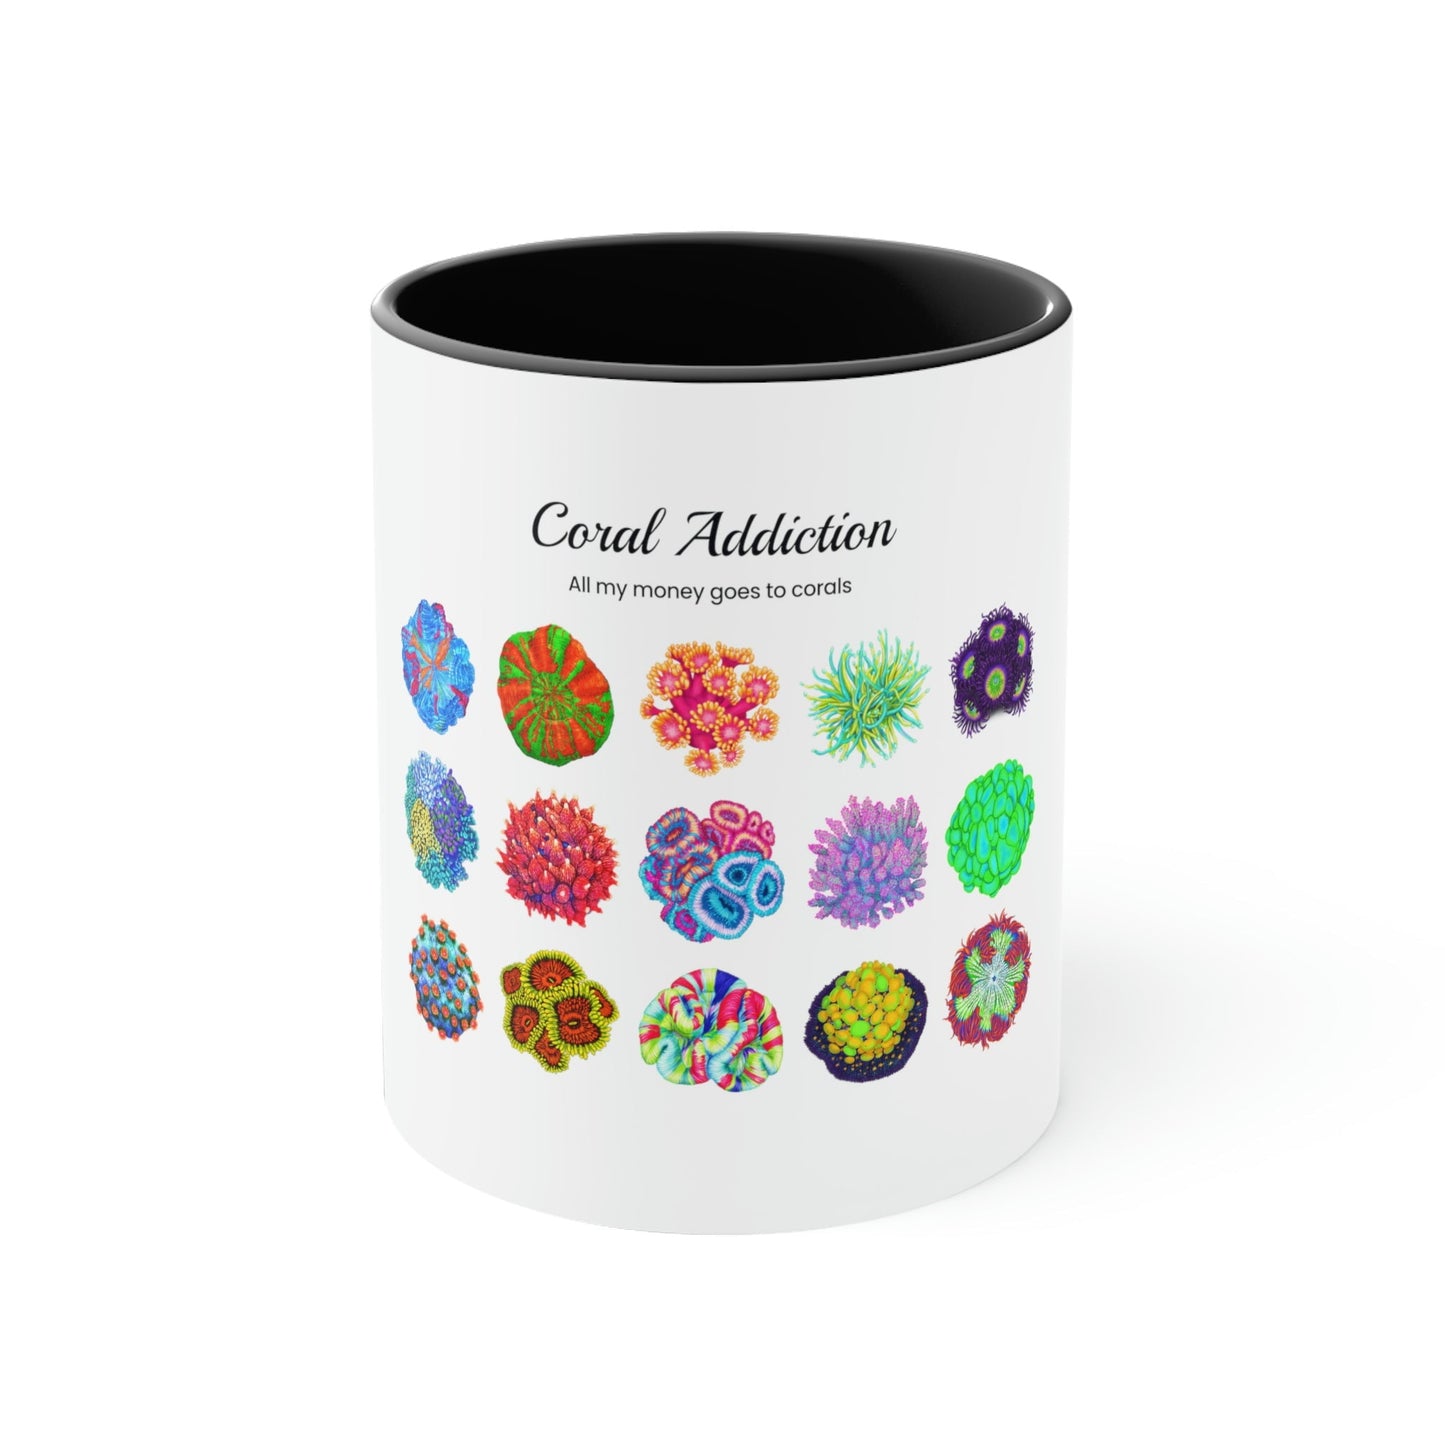 Coral Addiction (ft. 15 Hand-drawn Corals) - Reef of Clowns